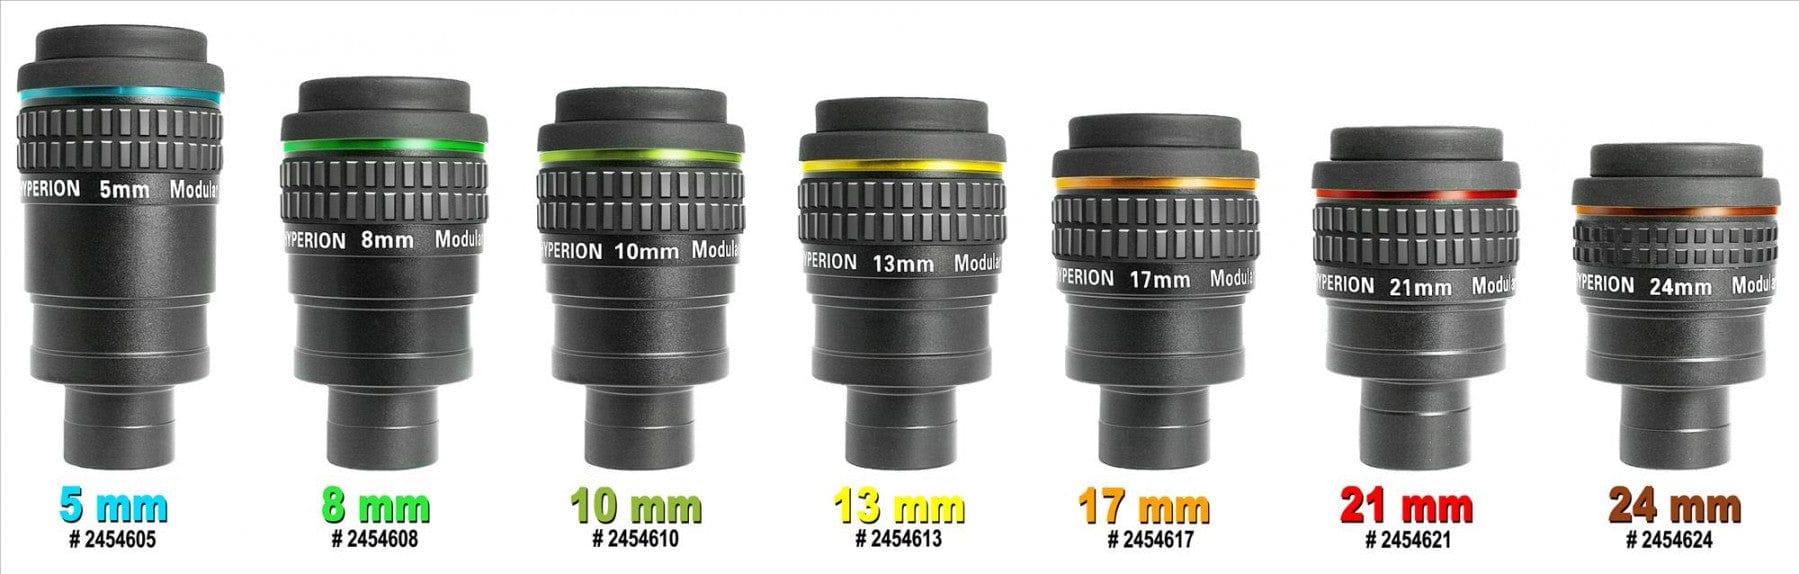 Baader Complete Eyepiece Set Consisting of All 7 Hyperion Modular Eyepieces  - Includes Fitted Hardcase - 2454600